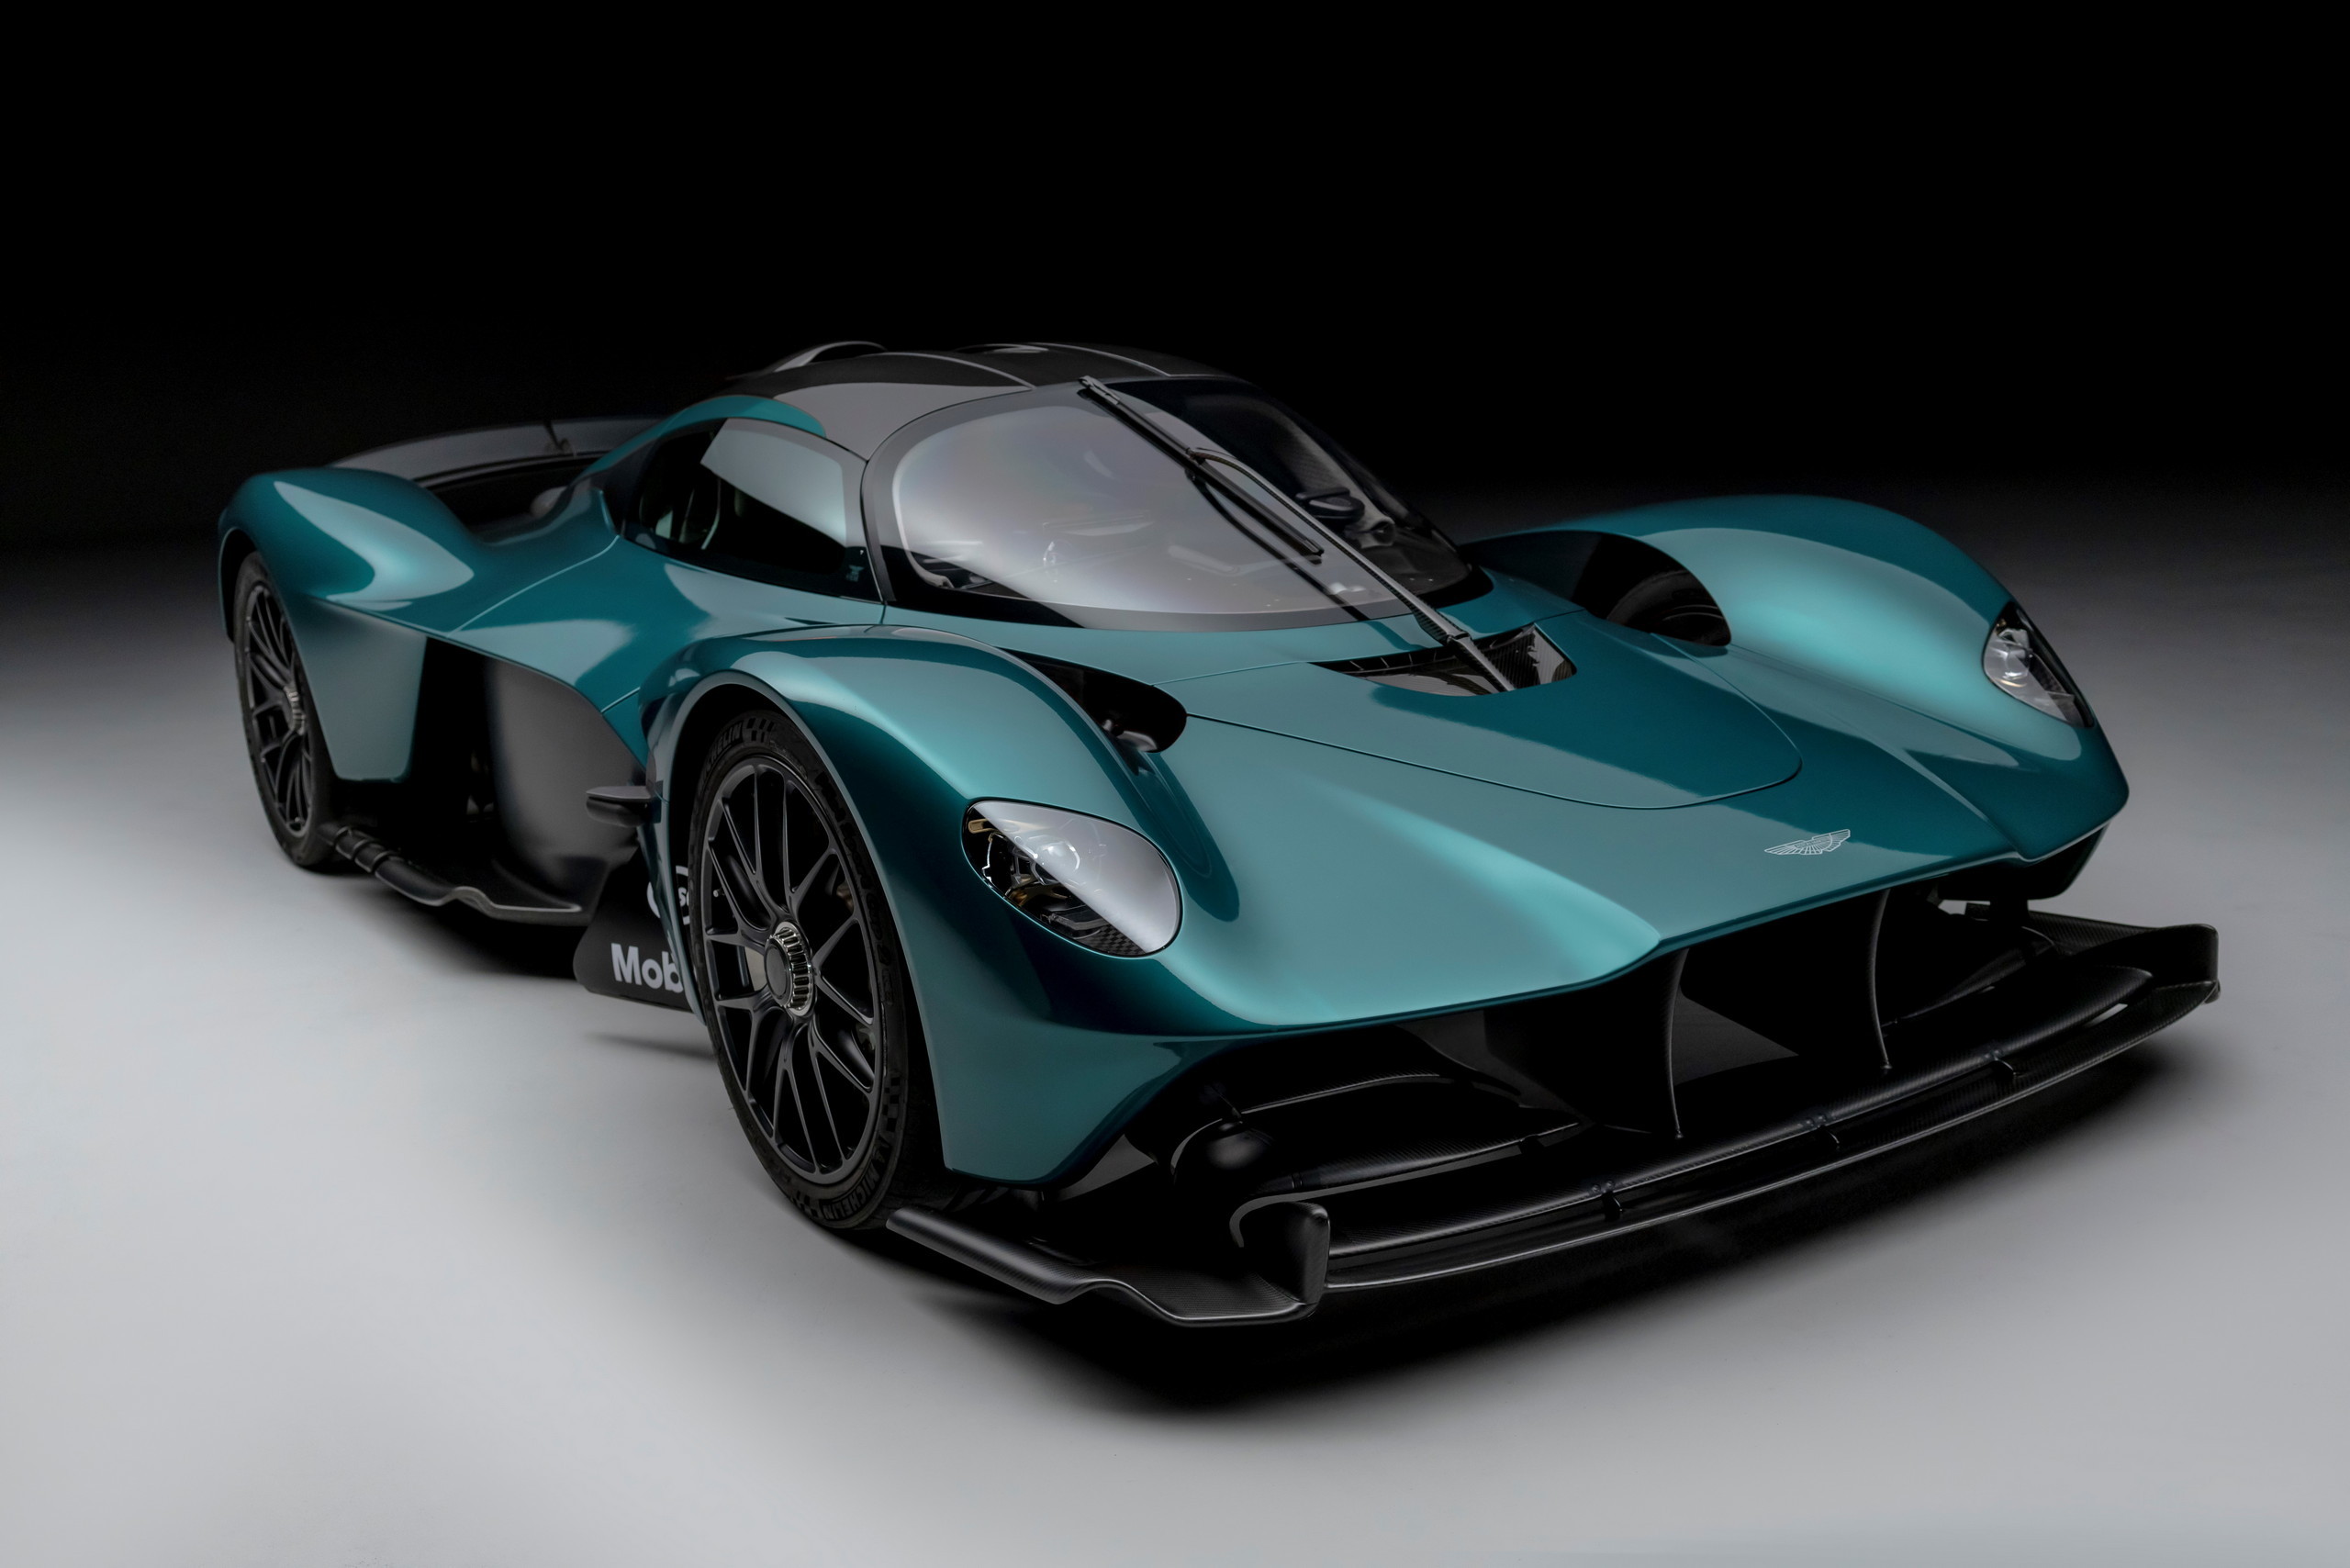 Aston Martin Valkyrie Top 10 Fastest Accelerating Hybrid Cars from 0 - 60 MPH - 2